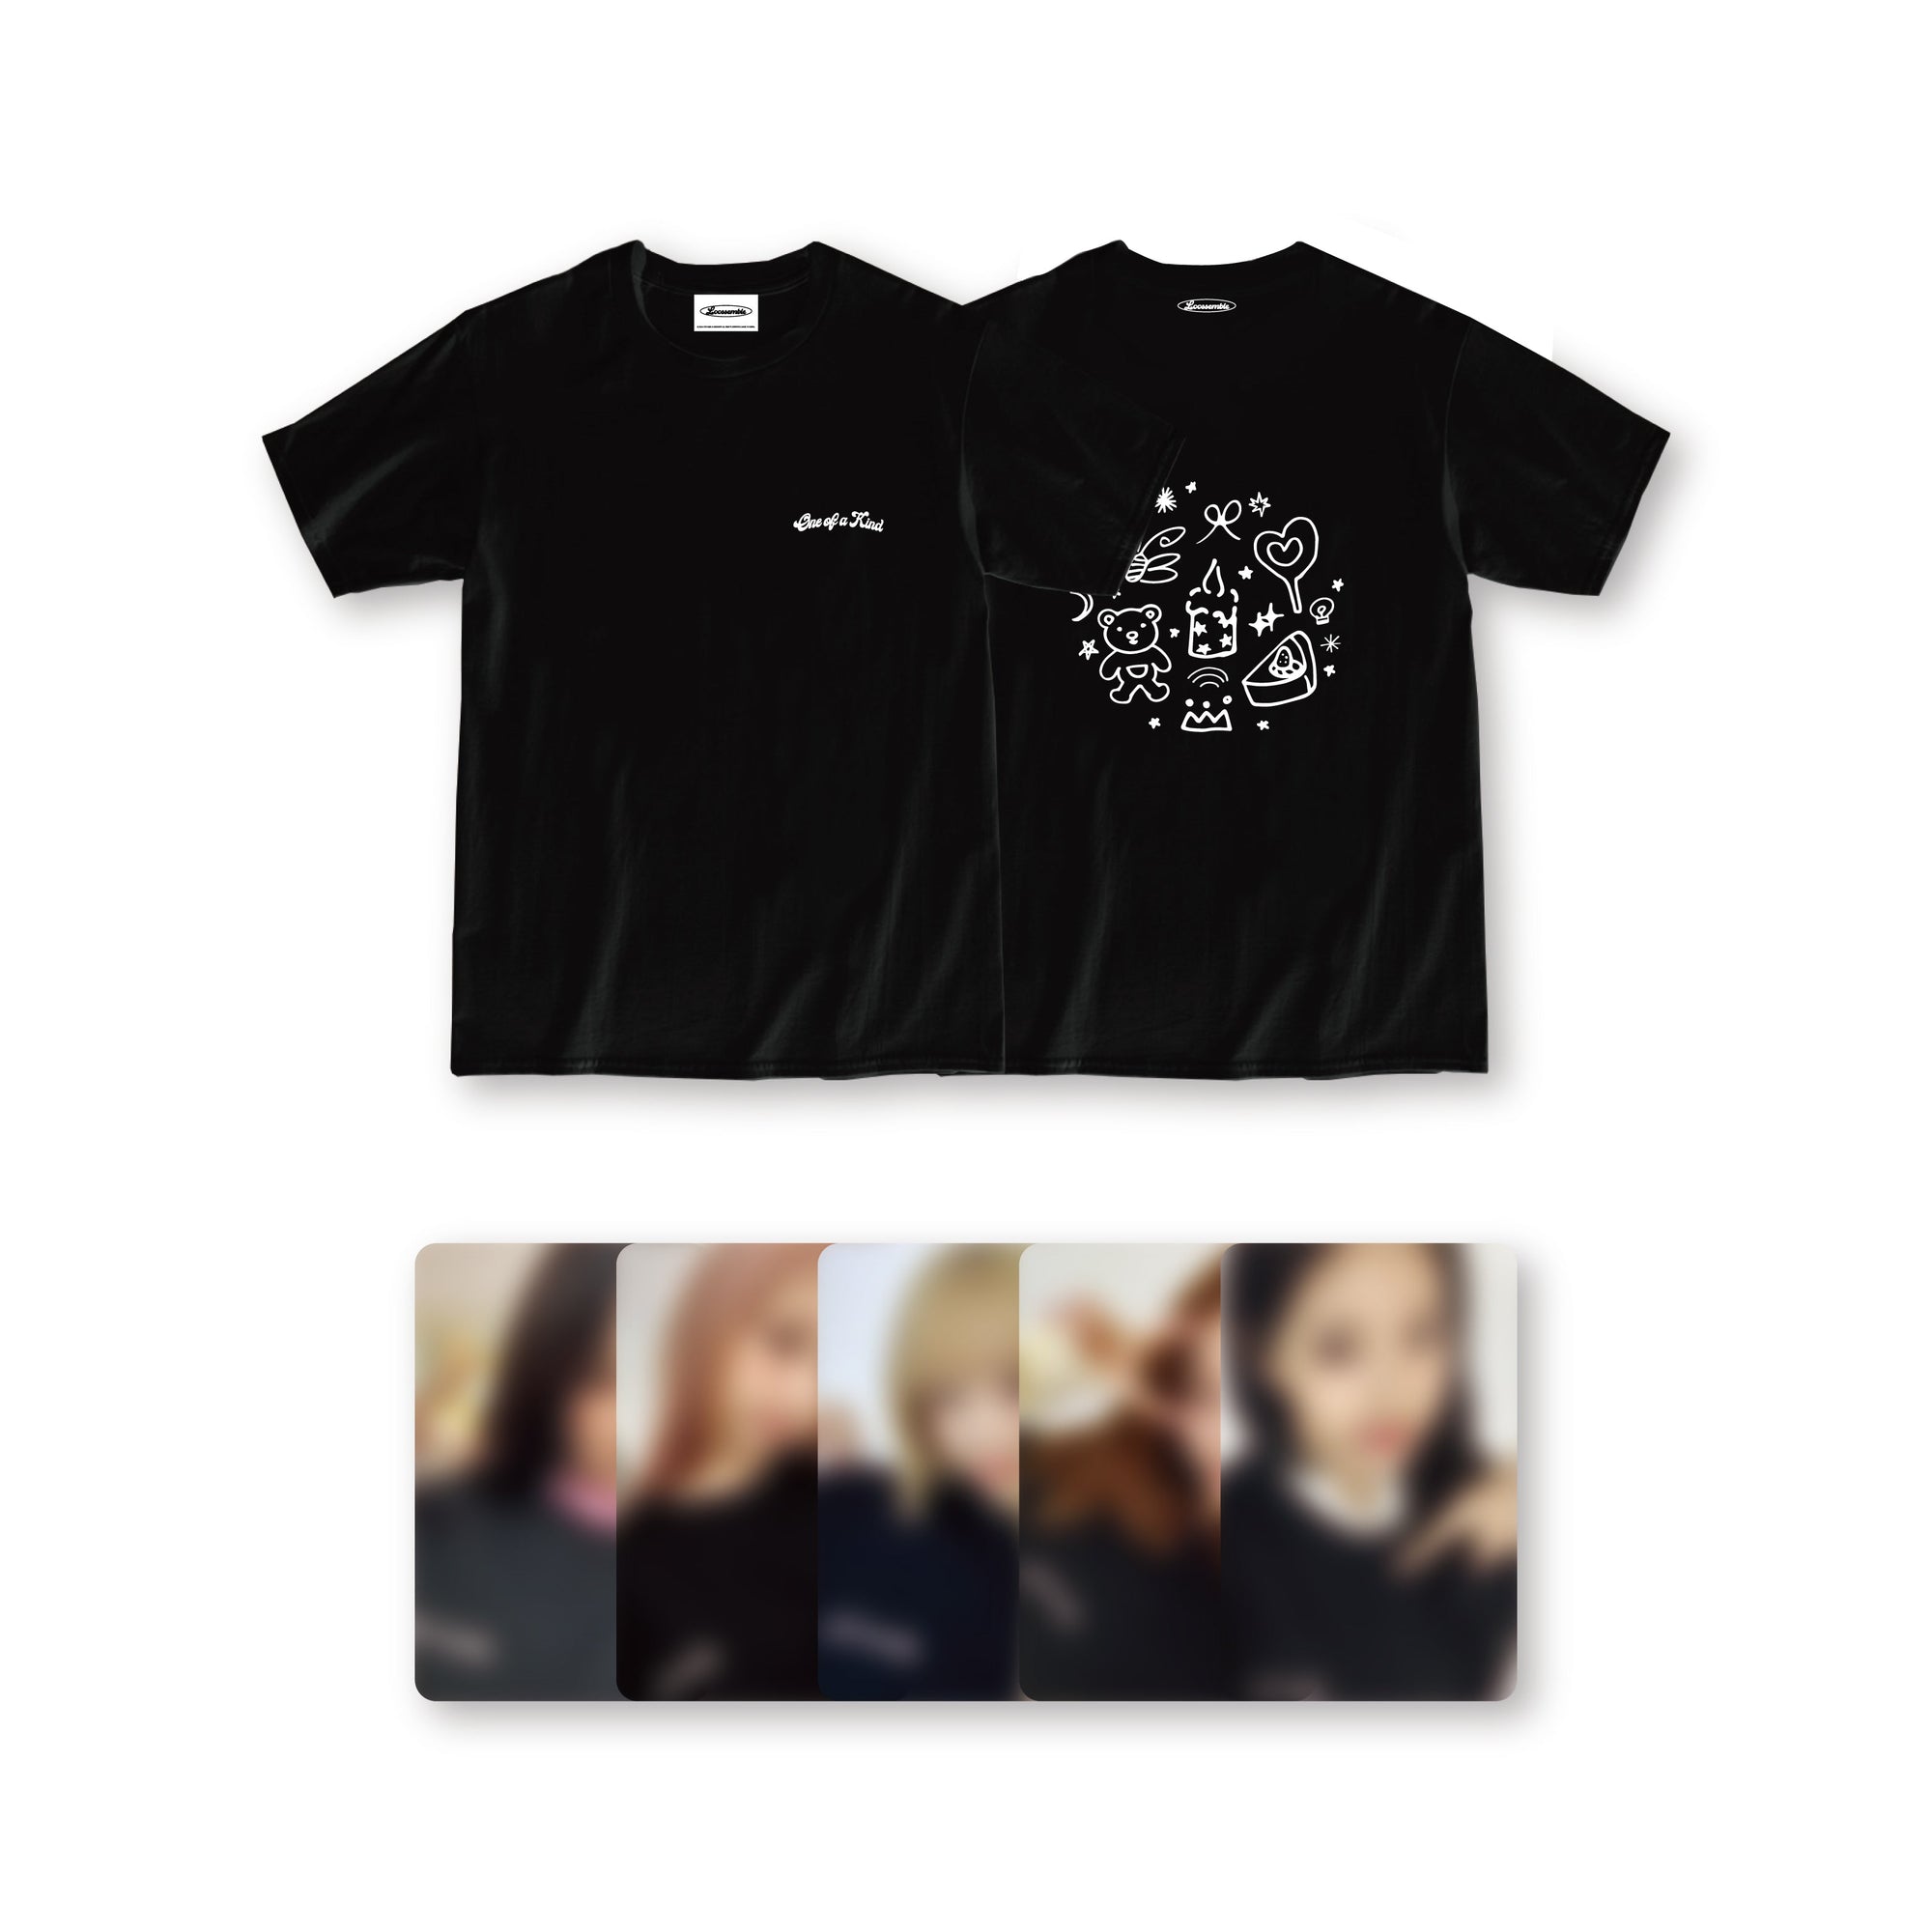 LOOSSEMBLE - ONE OF KIND 2ND MINI ALBUM OFFICIAL MD T-SHIRT - COKODIVE